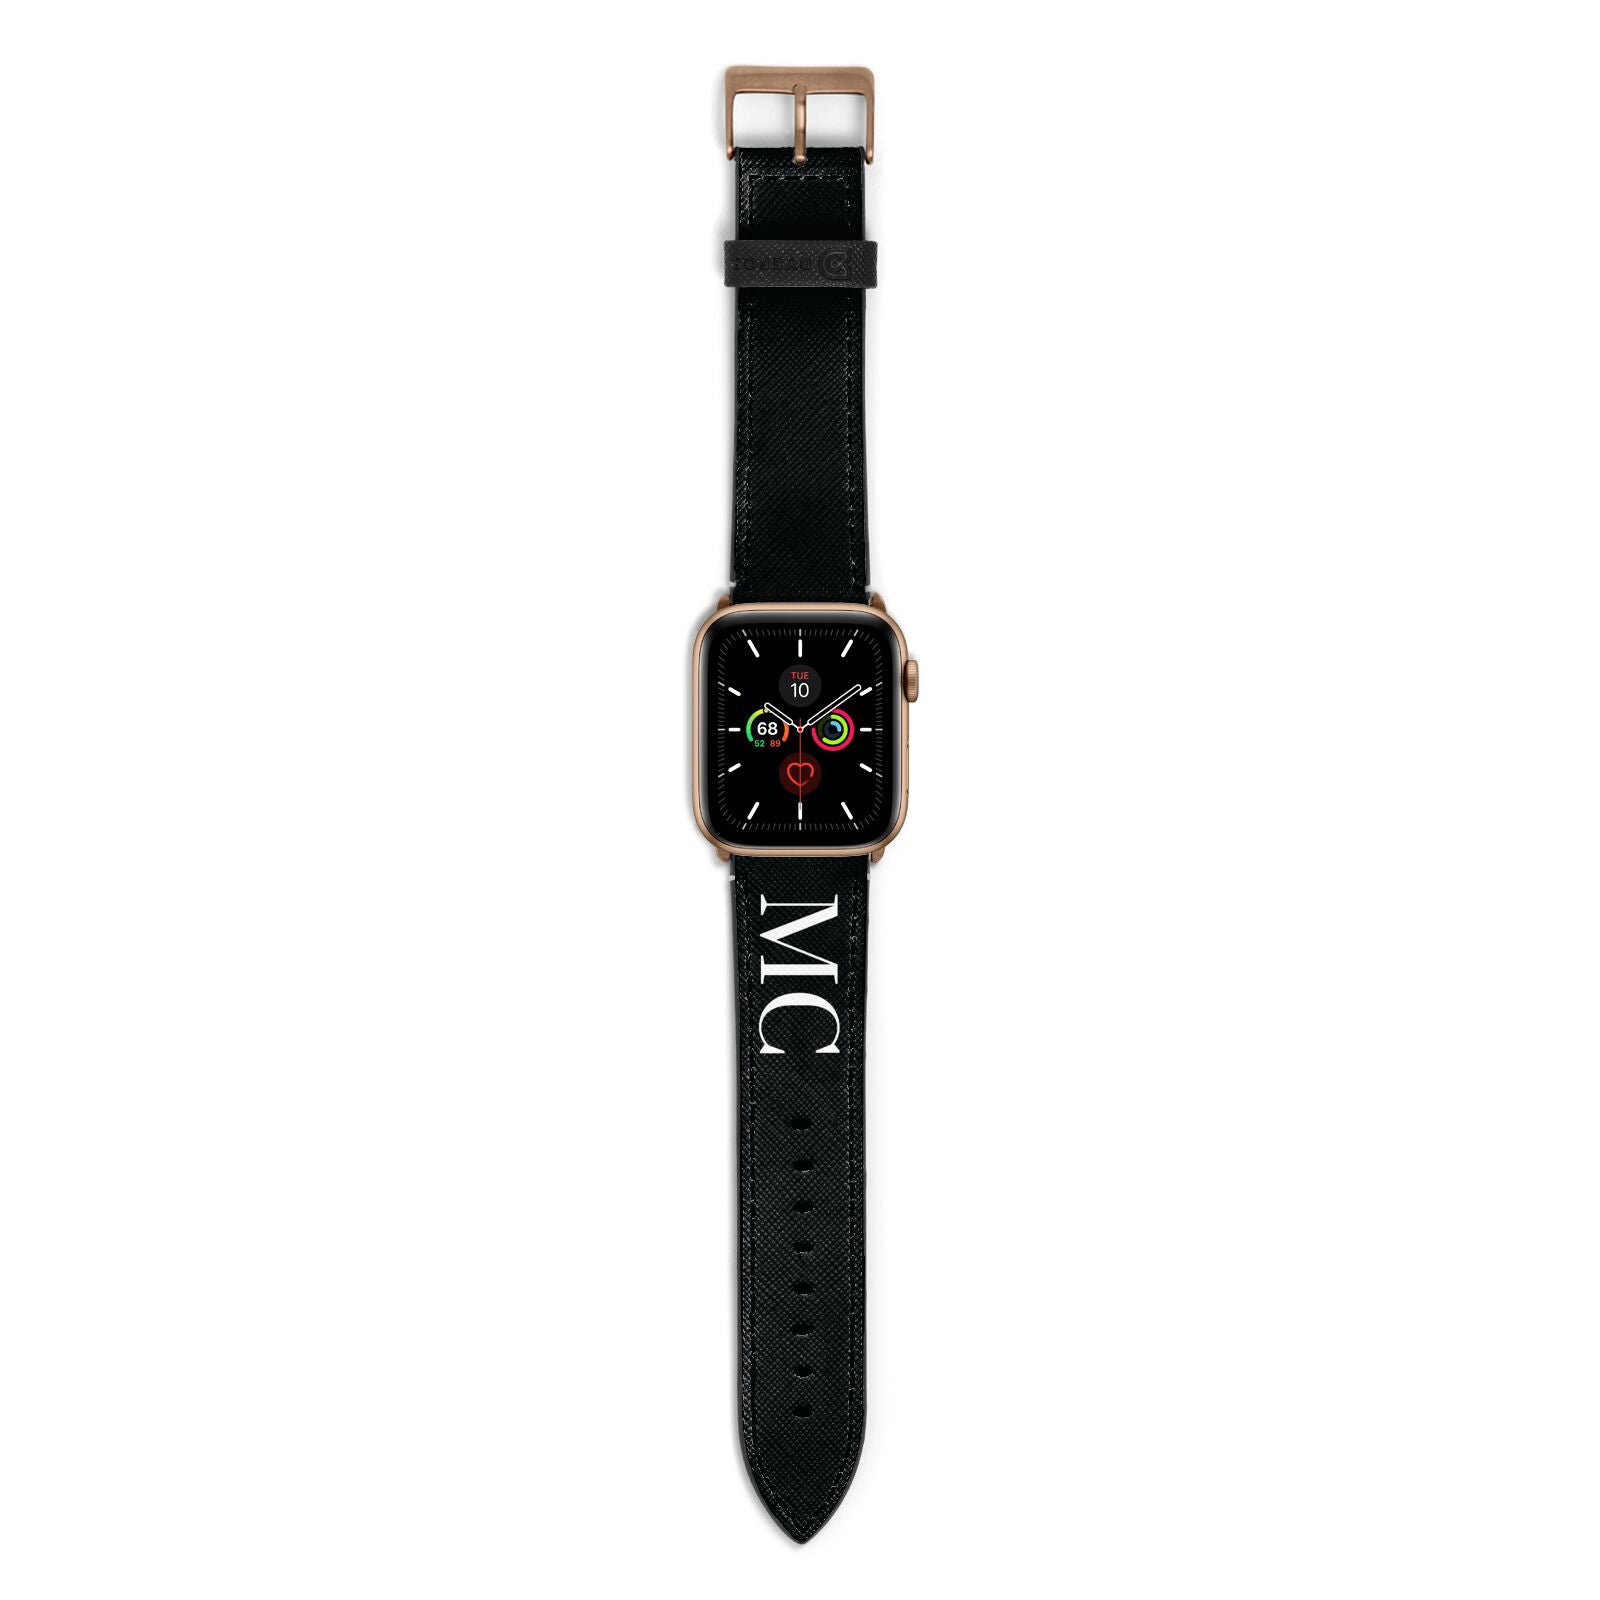 Initials Personalised 1 Apple Watch Strap with Gold Hardware